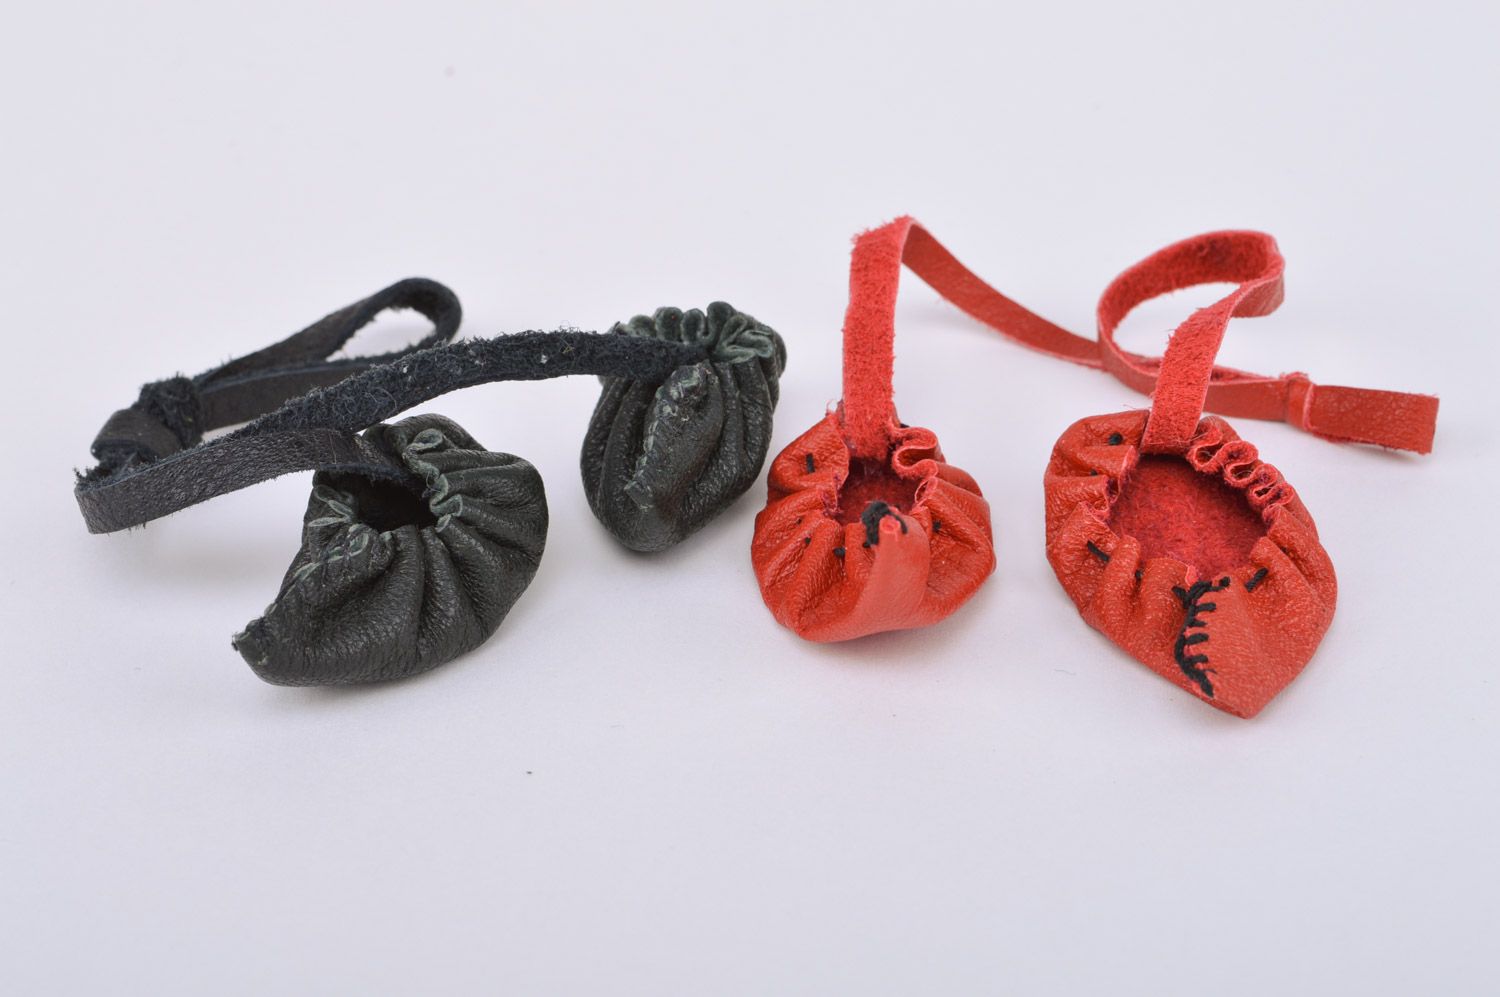 Set of handmade leather keychains 2 items bag charms black and red bast shoes with cords photo 2